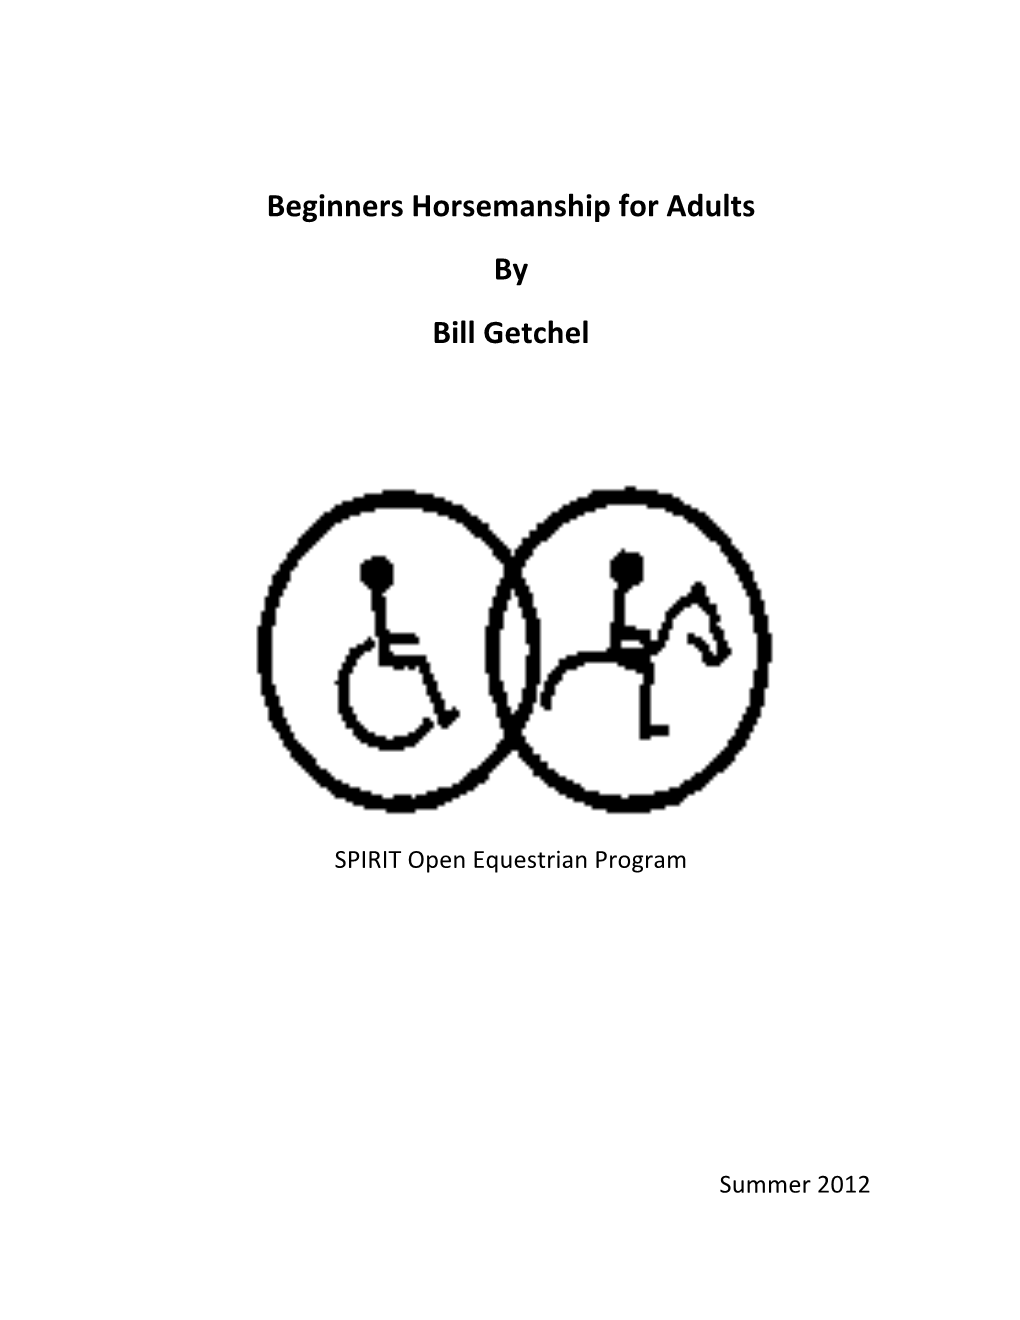 Beginners Horsemanship for Adults by Bill Getchel